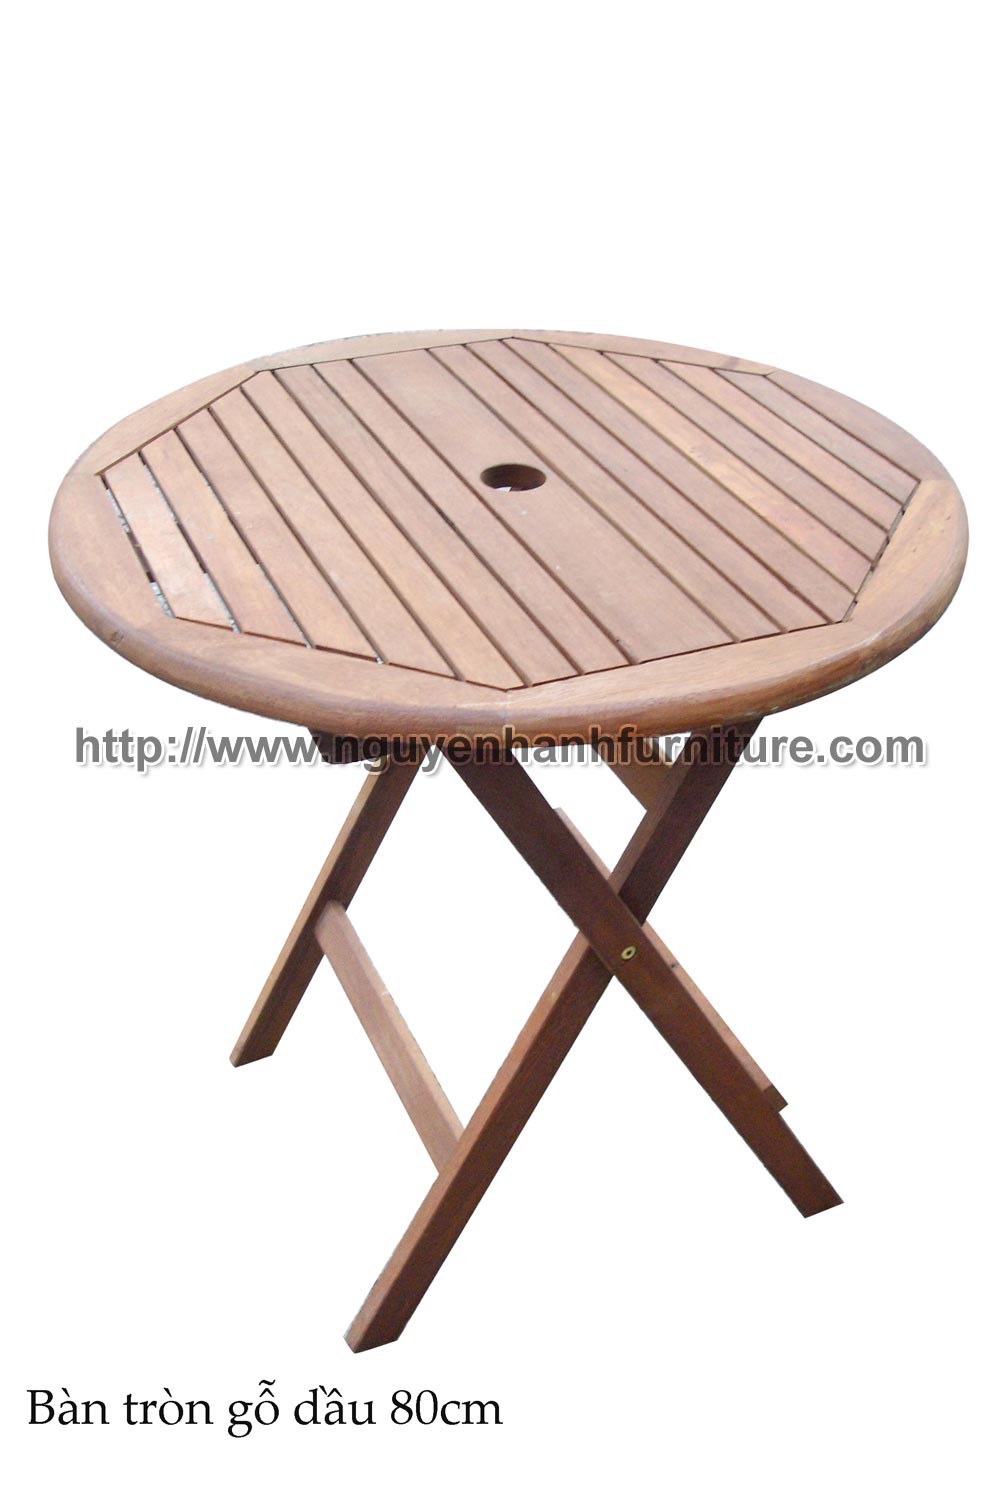 Name product: 0.8m Rounded table of Keruing wood 